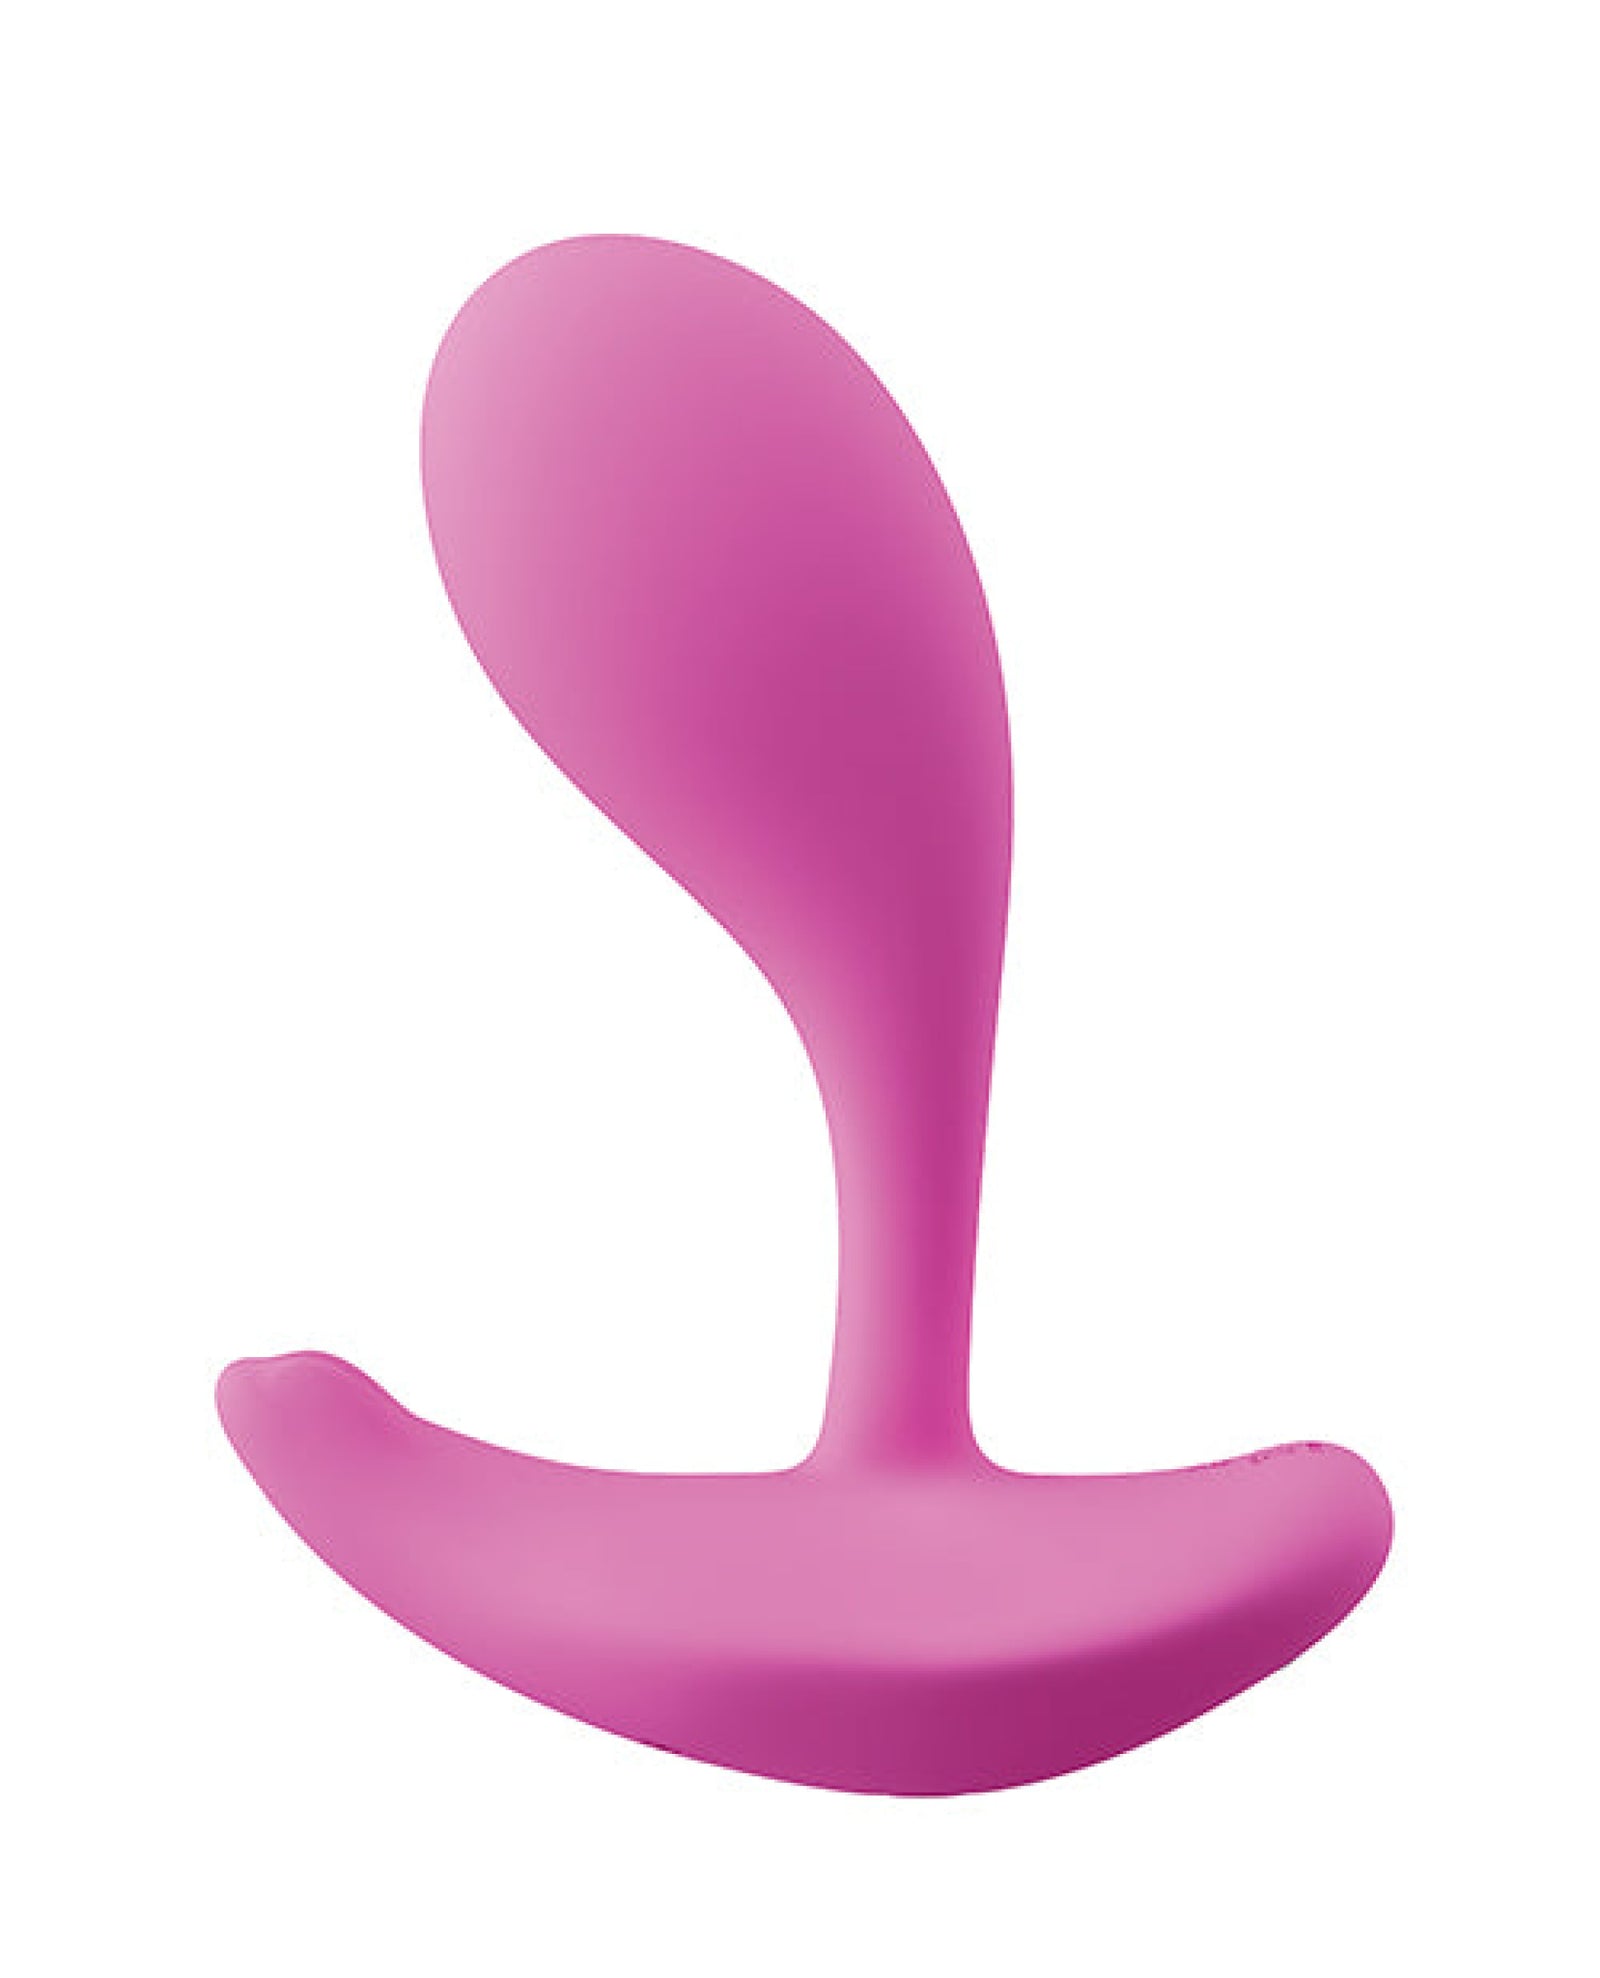 Oly App-enabled Wearable Clit & G Spot Vibrator - Pink Uc Global Trade INChoney Play B